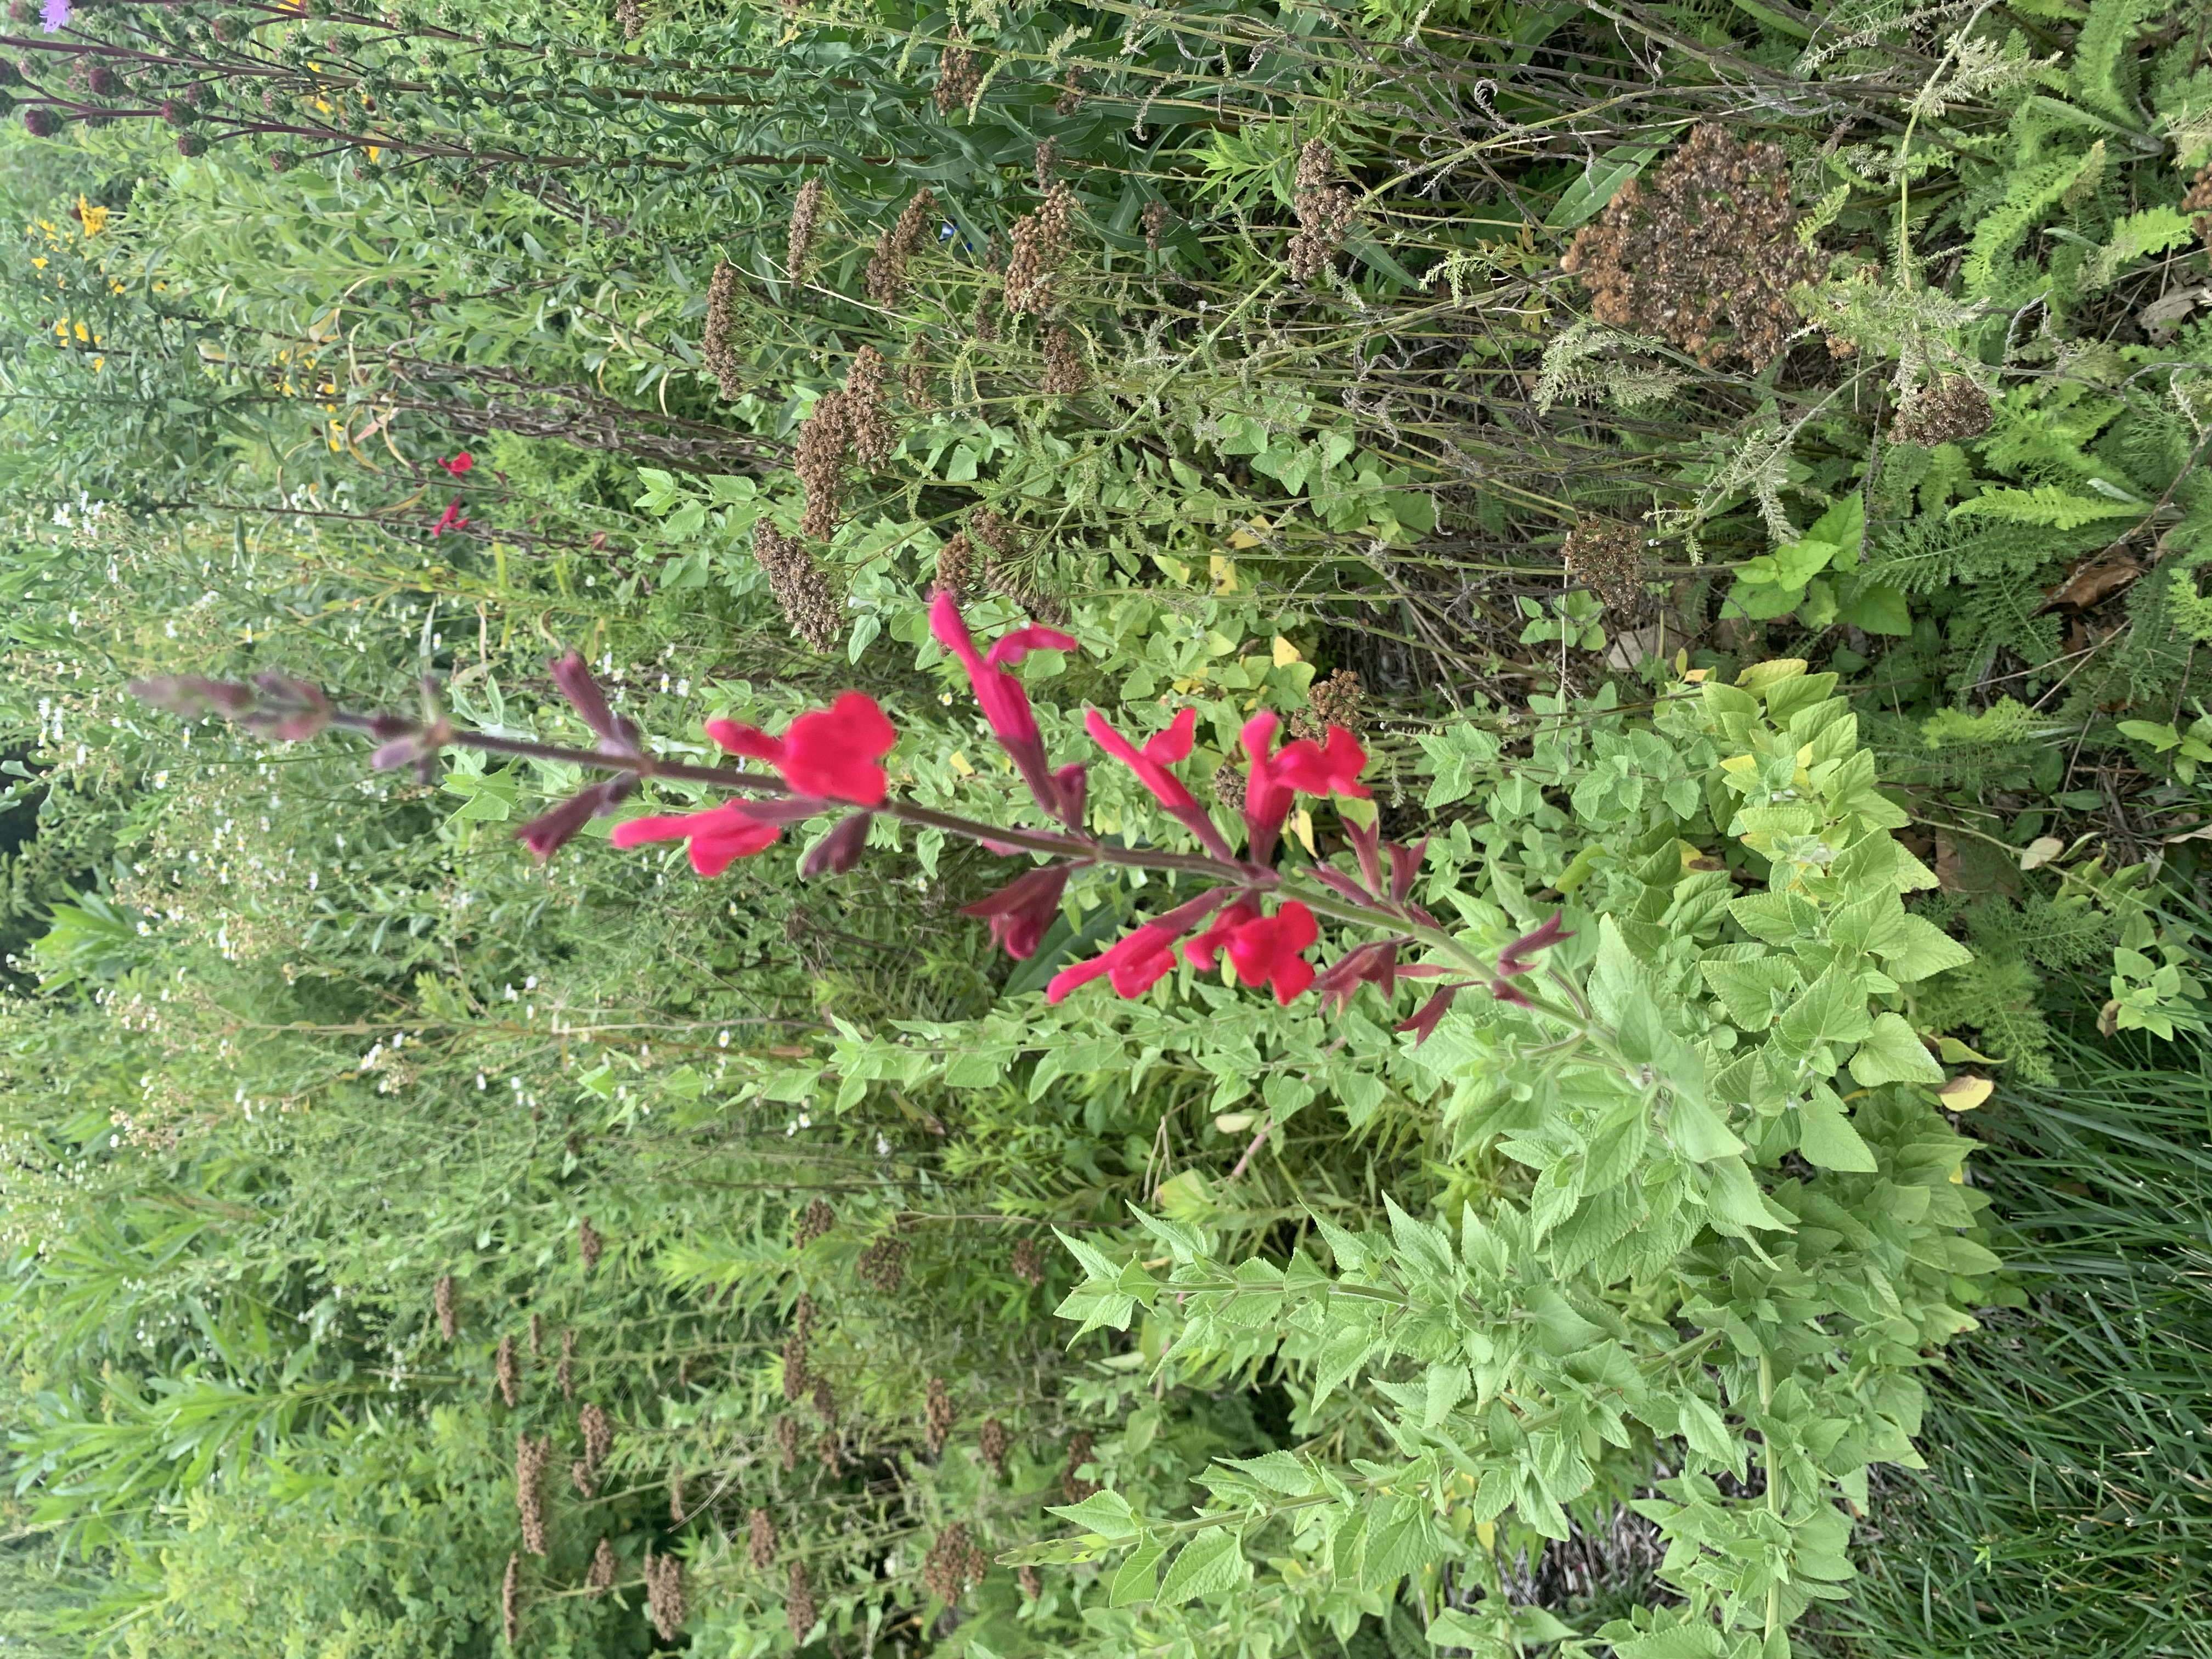 A thin dark-red flower stalk with brilliant red trumpet-like flowers sticking out in all directions